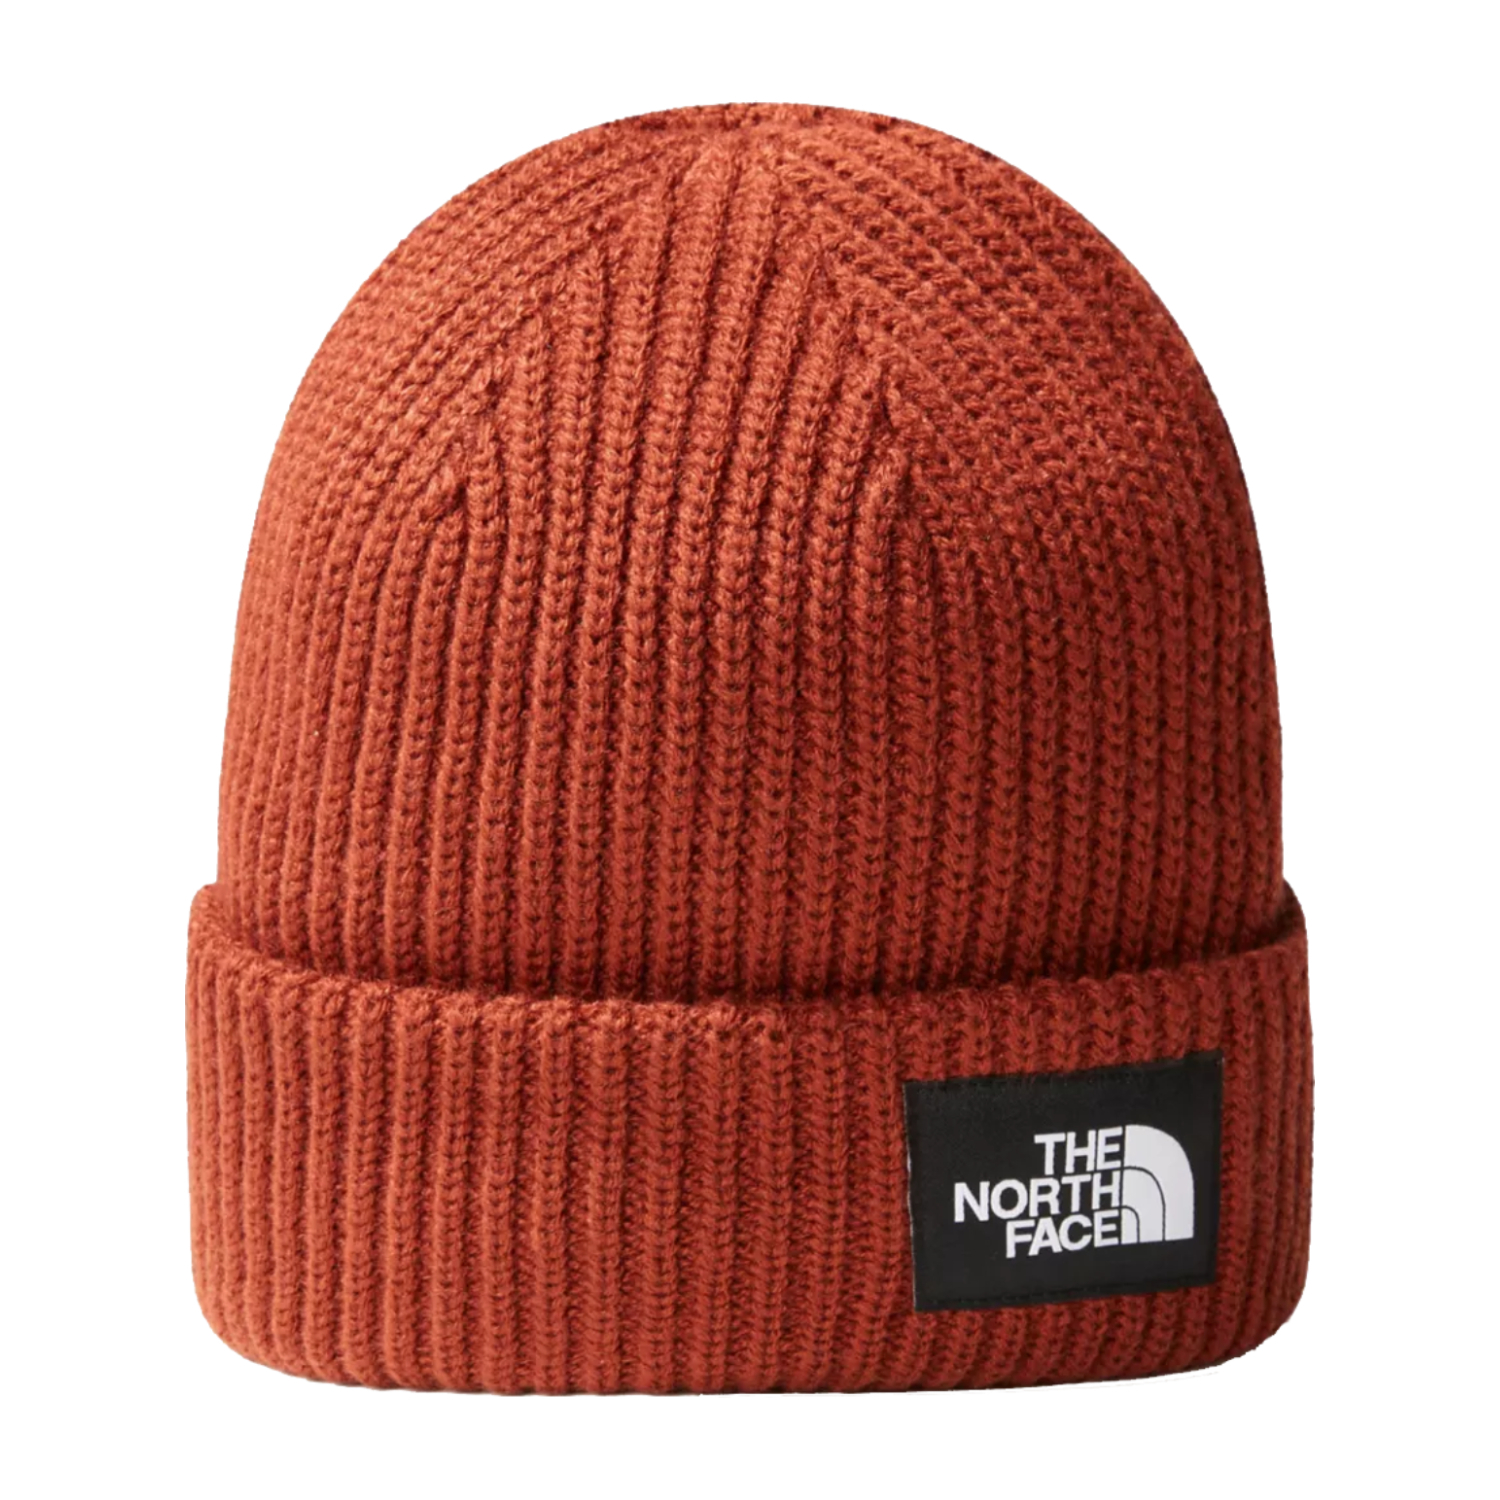 Czapka The North Face Salty Dog Beanie brandy brown - ONE SIZE